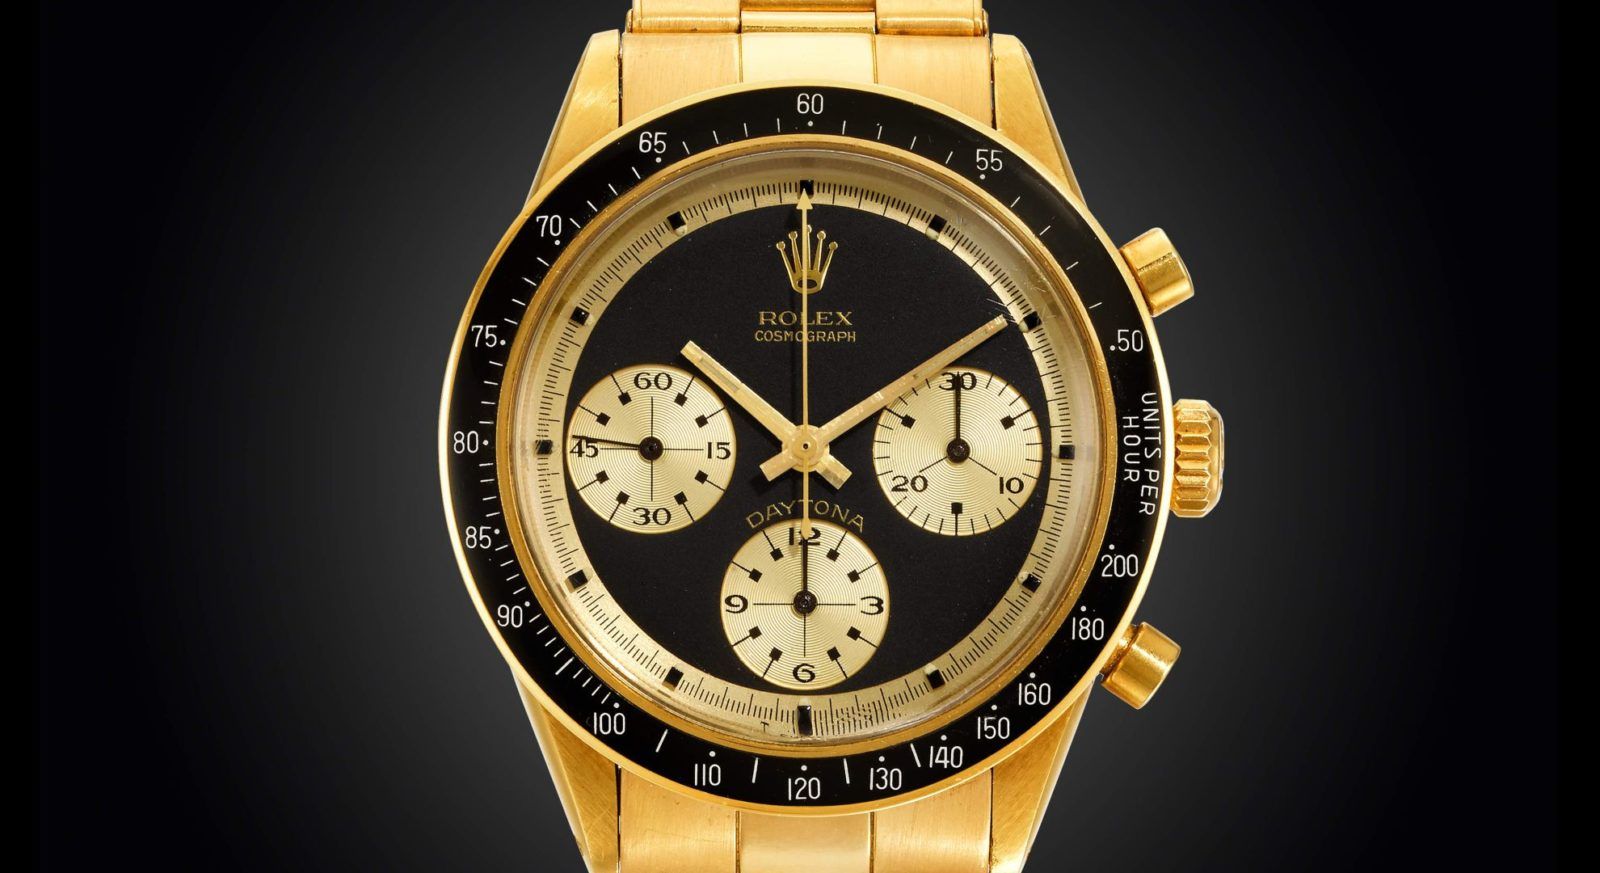 Rolex Daytona, the expensive watch ever sold in online auction